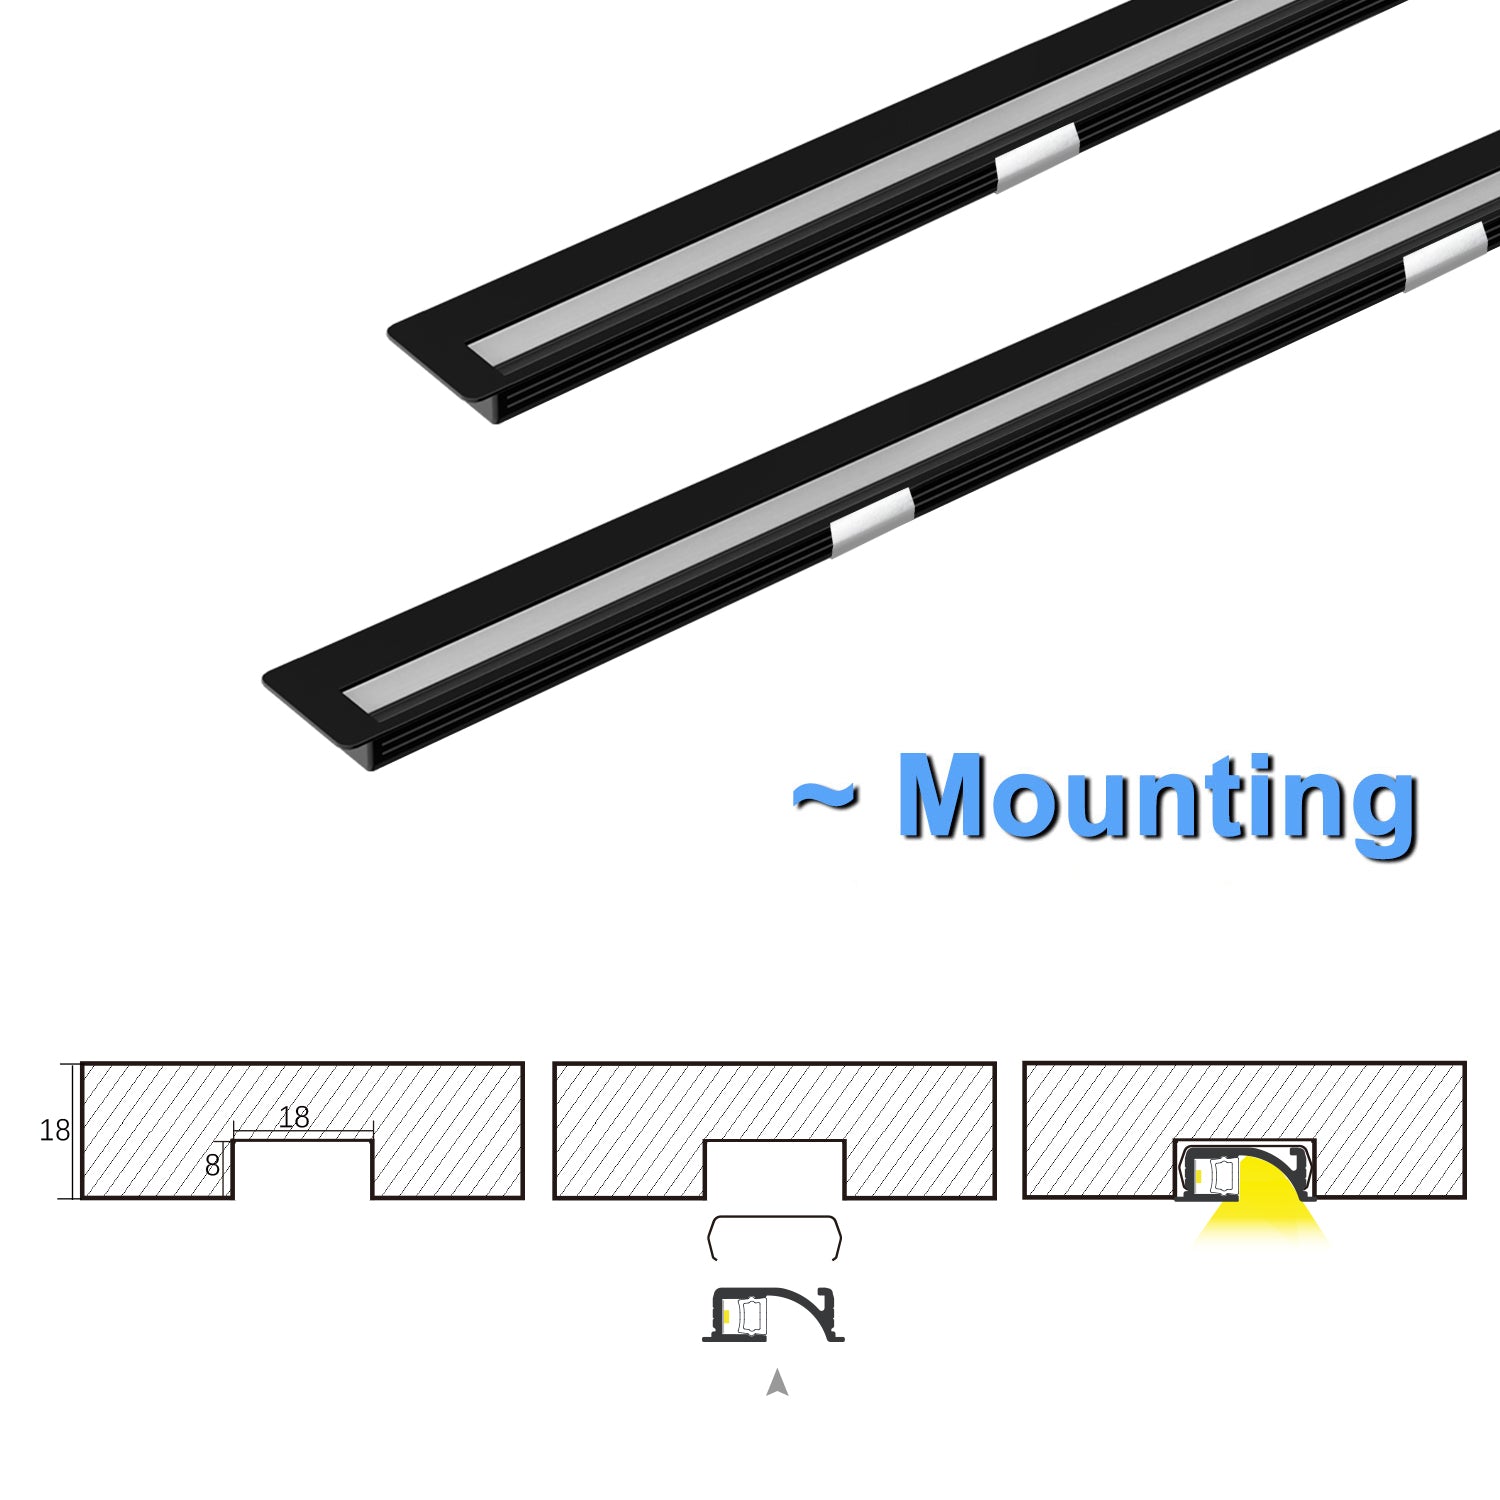 Send an inquiry for Ultra-thin LED Diffuser Channel AL6063 Recessed Mounted LED Aluminum Profile to high quality LED Diffuser Channel supplier. Wholesale LED Aluminum Profile directly from China LED Diffuser Channel manufacturers/exporters. Get a factory sale price list and become a distributor/agent-vstled.com